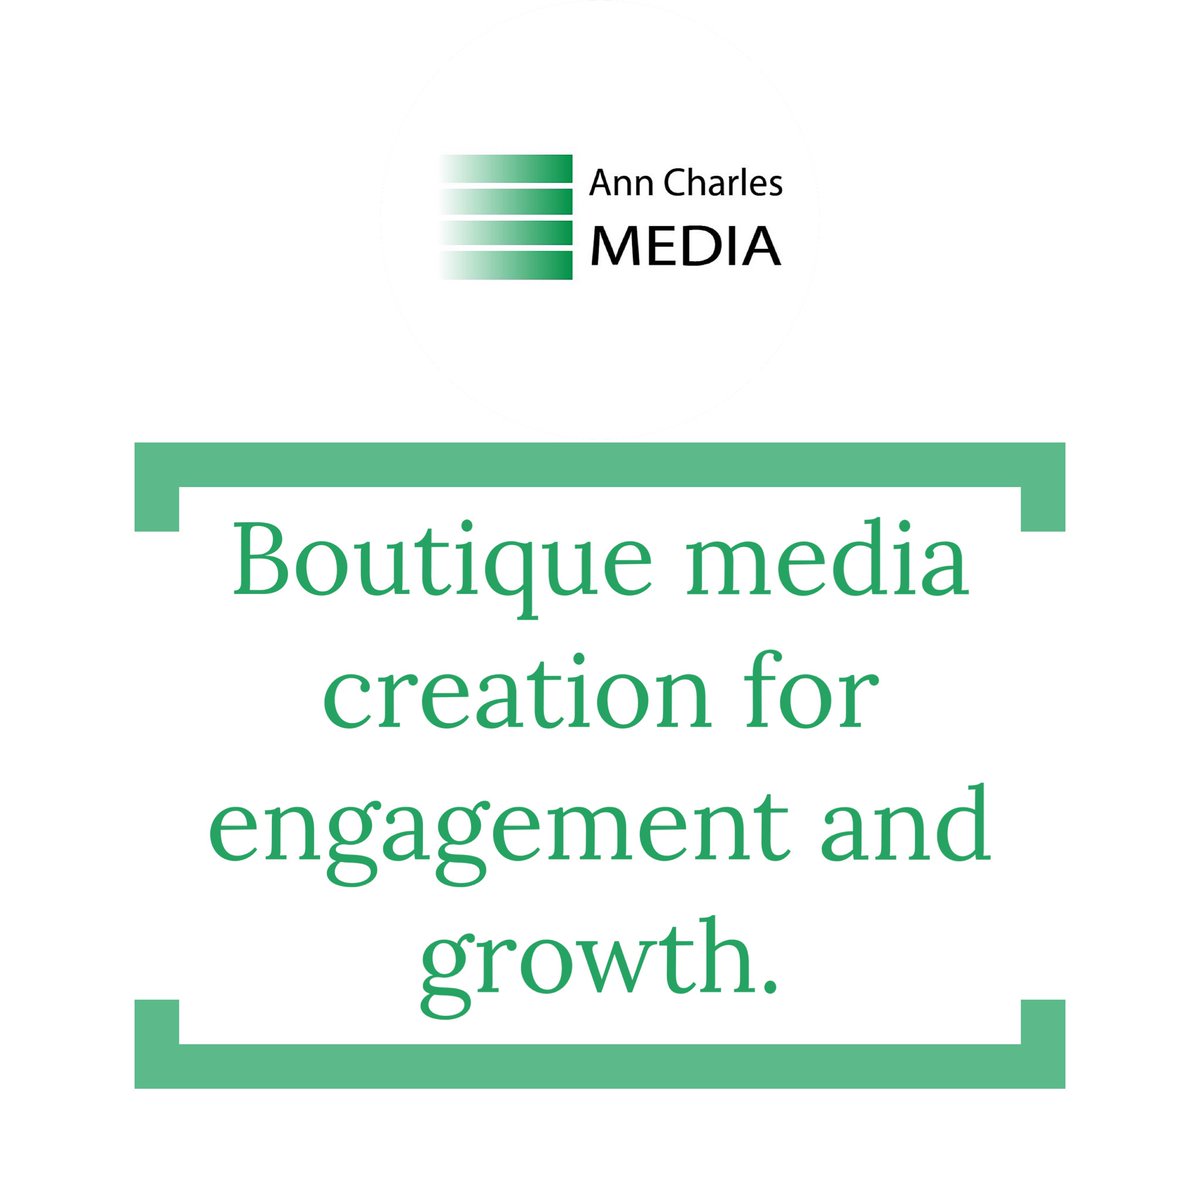 Crafting meaningful connections through web design, email marketing, and content creation. Choose excellence, choose Ann Charles Media. 

💌 anncharlesmedia.com

#DigitalExcellence #CraftingConnections #OaklandCounty #Media #Marketing #AnnCharlesMedia